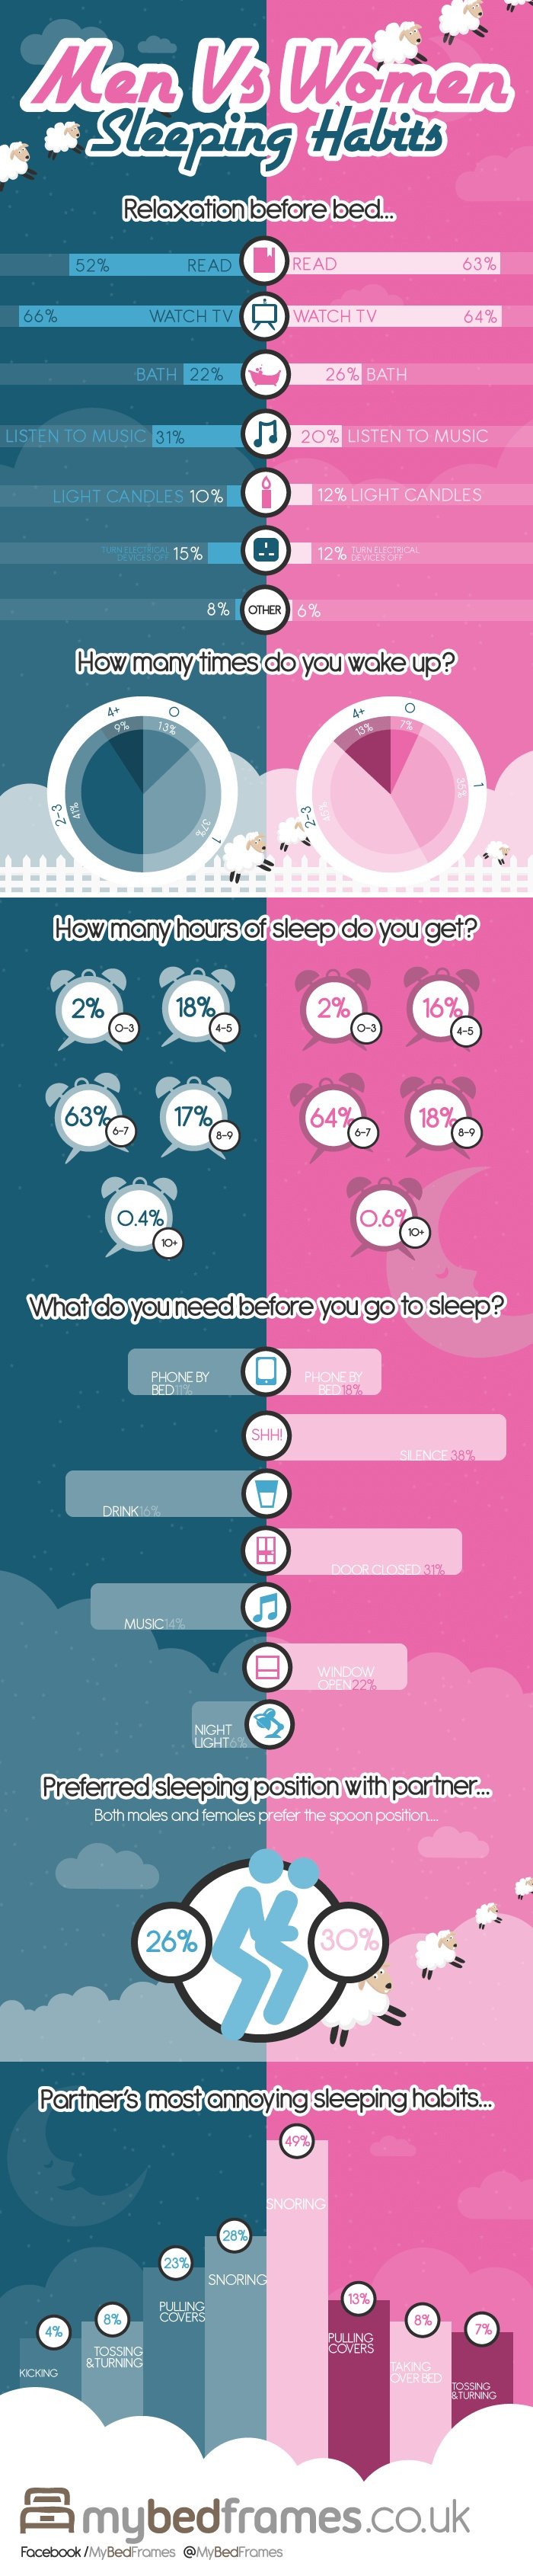 The Sleeping Habits Of Men And Women and How They Differ Infographic